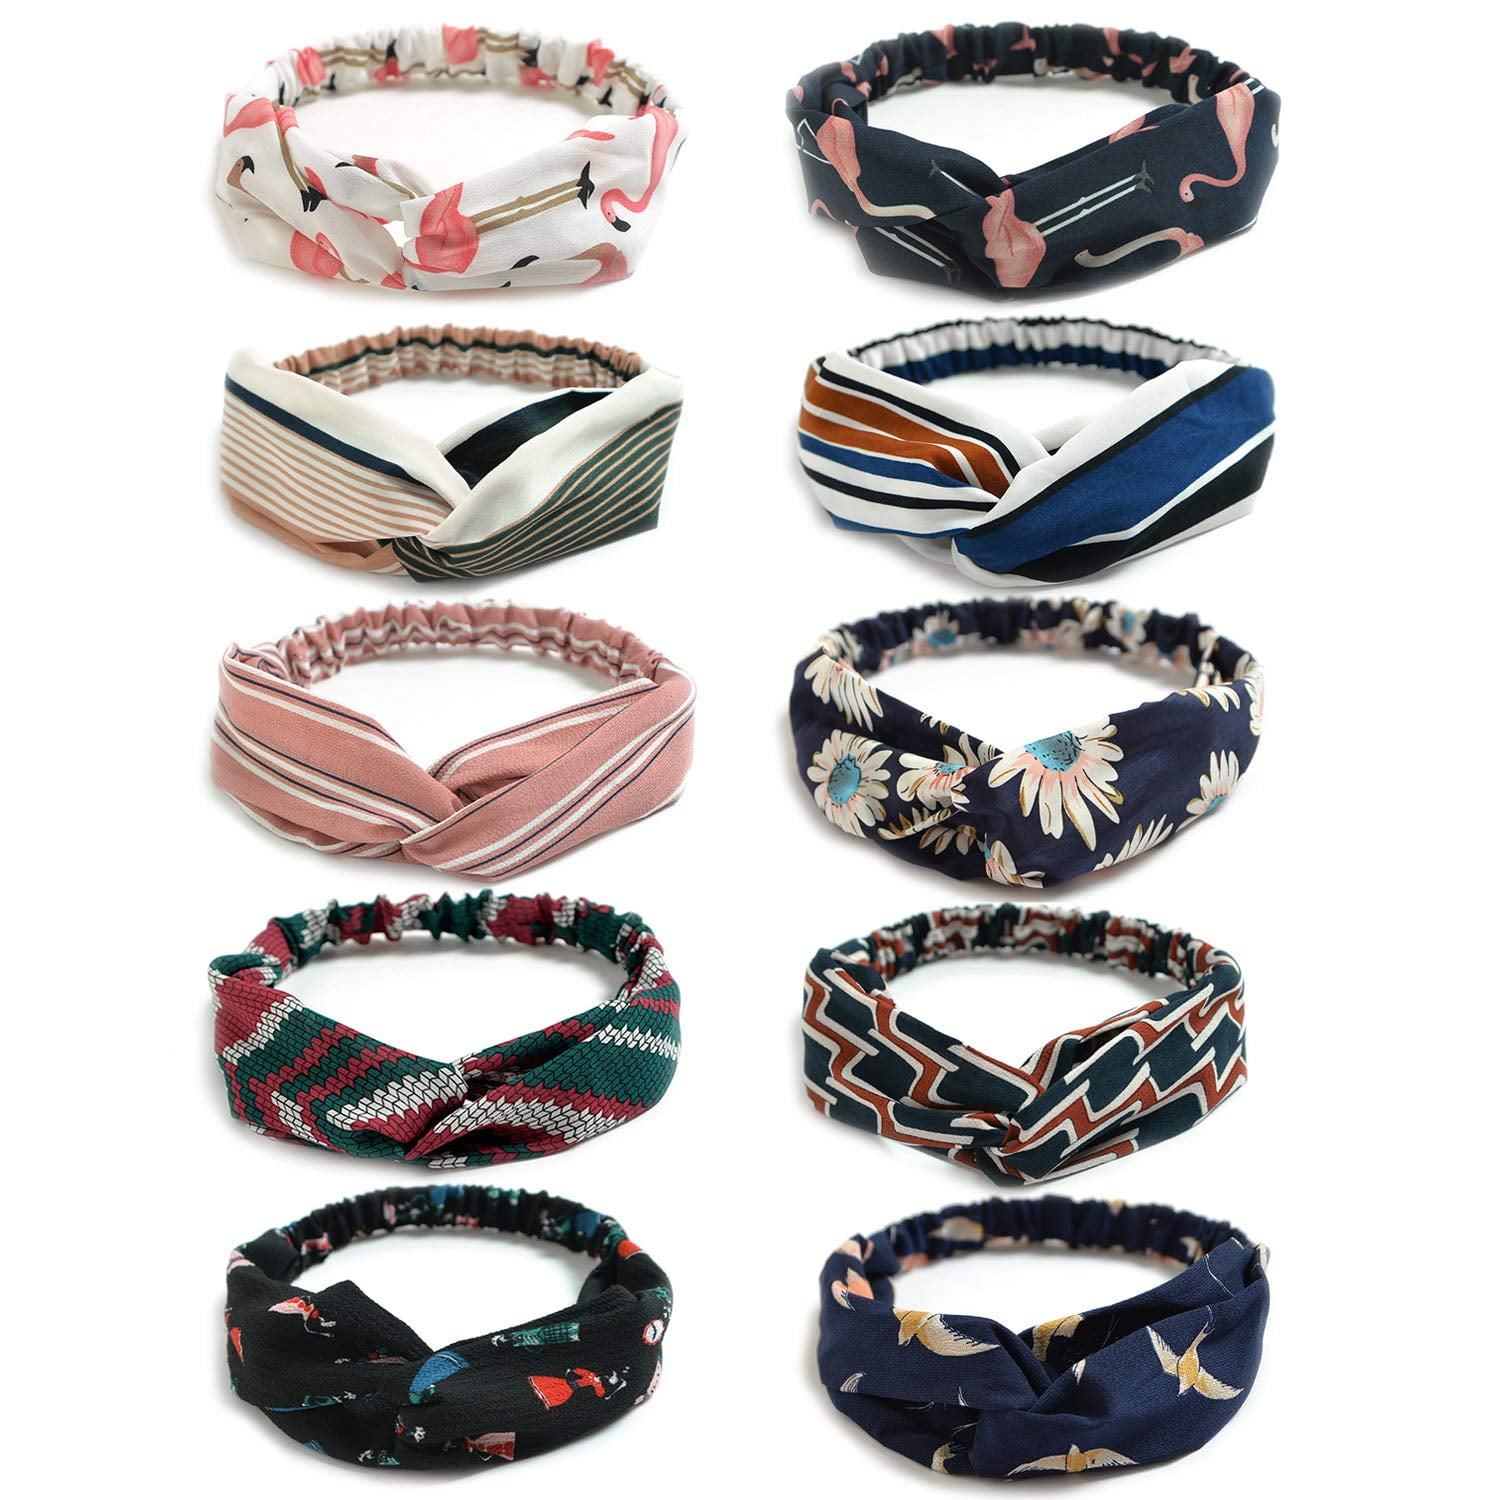 10 Pack Womens Headbands Elastic Hair Band Accessories with Boho Flower Printing Twisted Criss Cross 2019